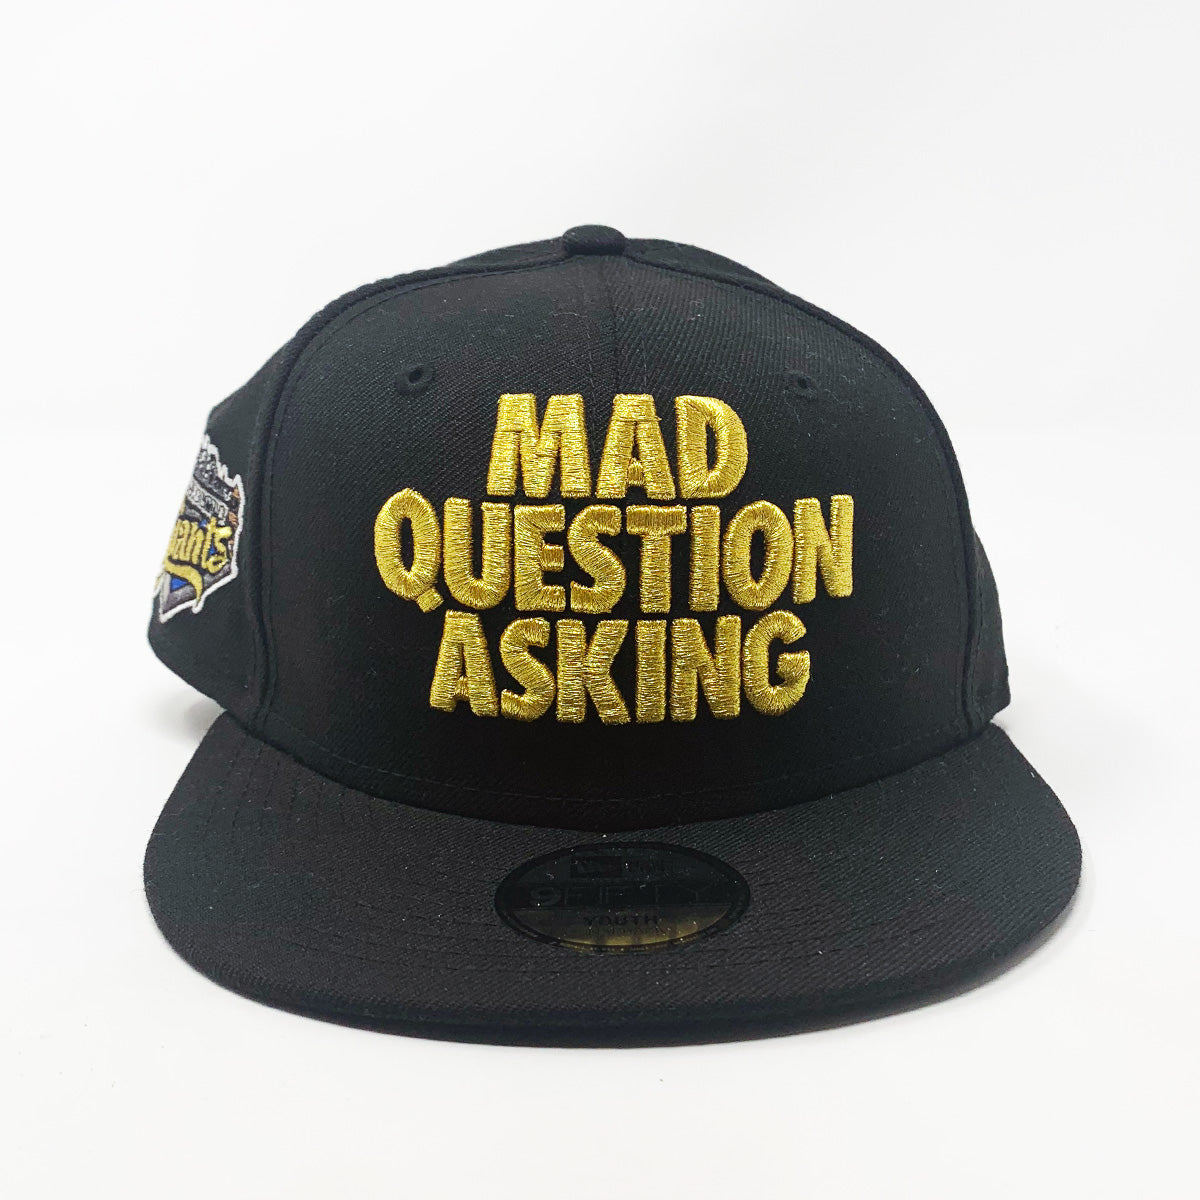 Mad Question Asking Hat (Black/Gold)